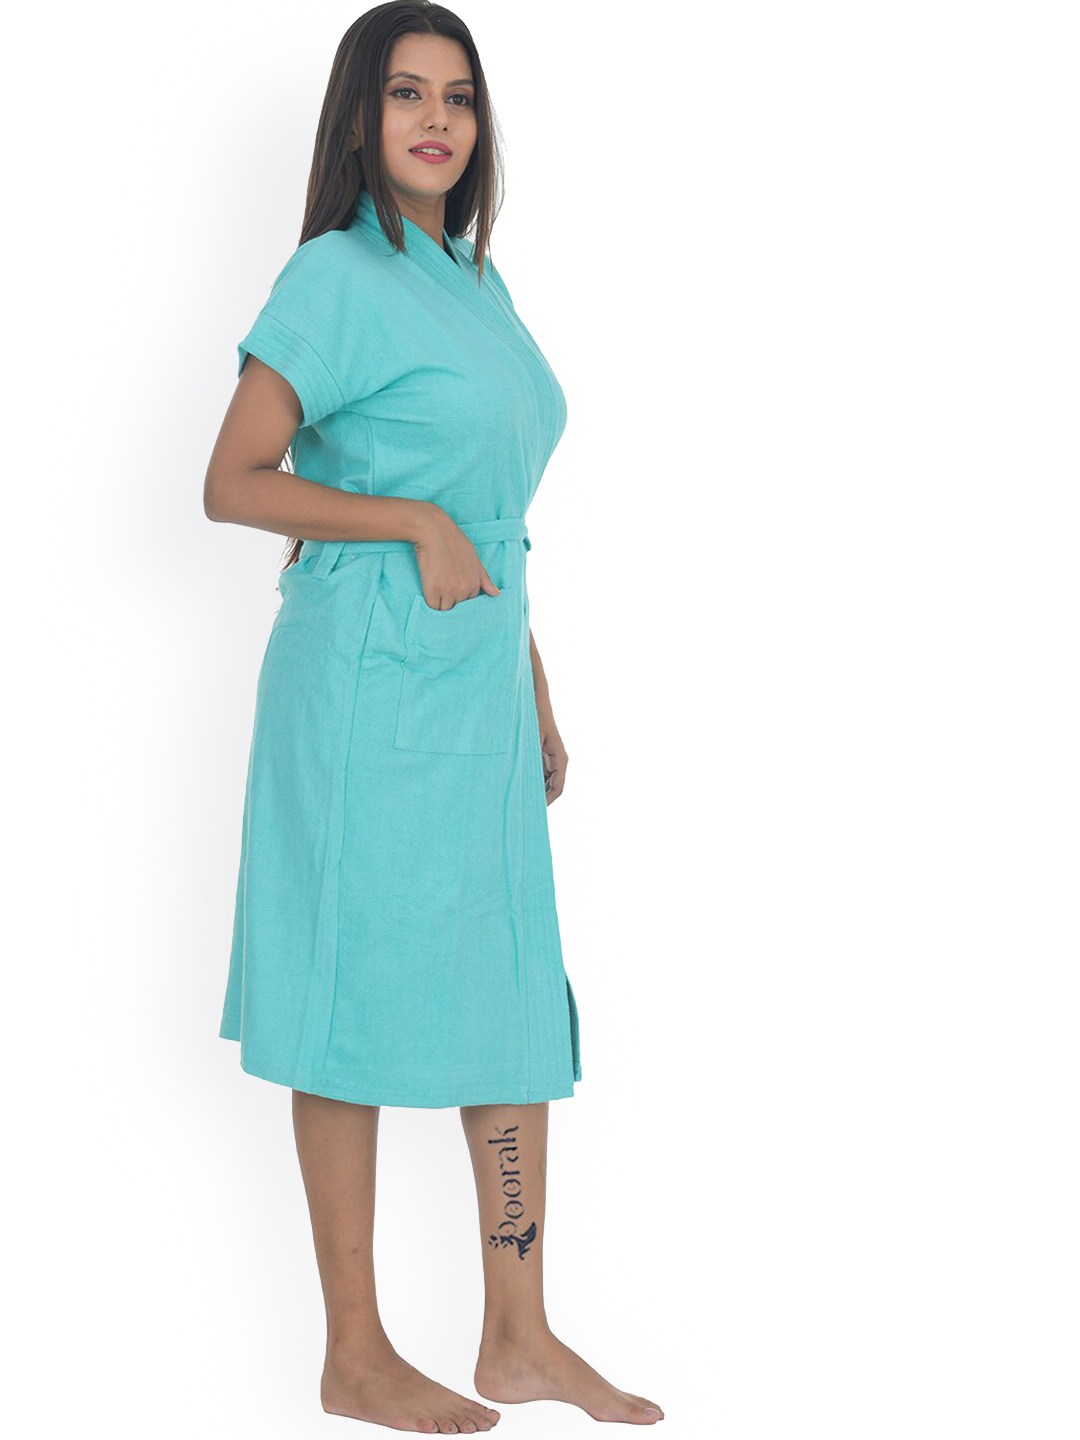 POORAK Light Blue Solid Terry Cotton Bath Robe Price in India